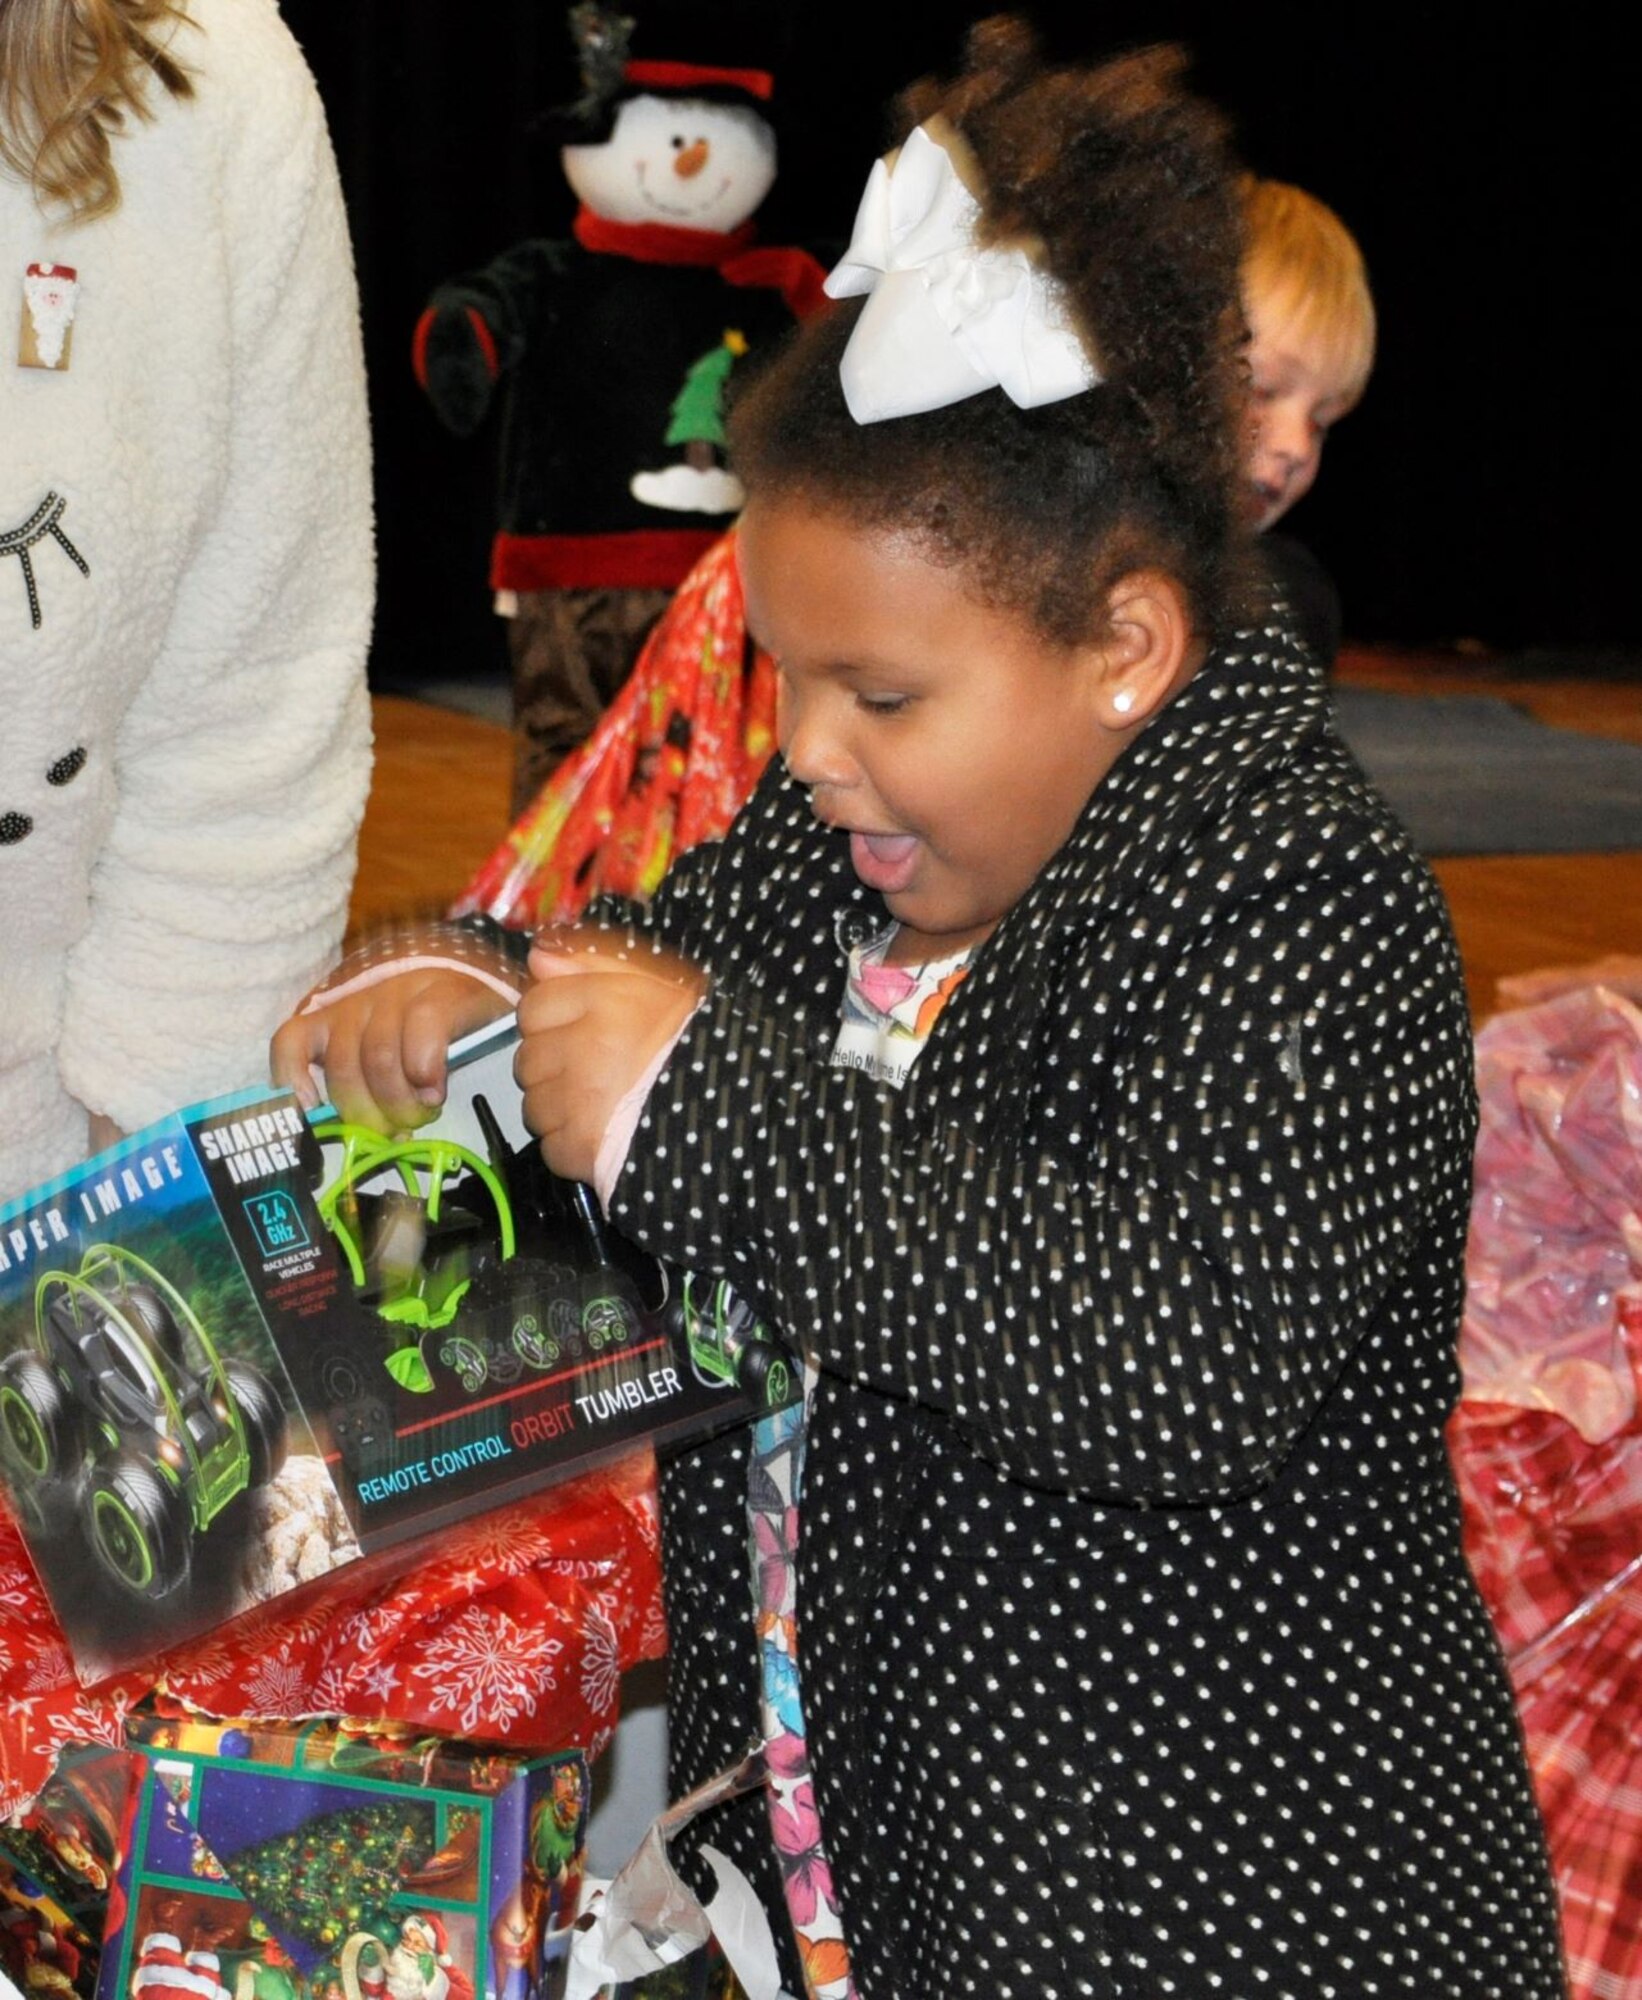 A student from Lucille Moore Elementary School in Panama City, Florida, gasps with surprise as she opens her gift to reveal a new remote control car.  On Dec. 19, members of the Air Force Civil Engineer Center Emergency Management team at Tyndall Air Force Base, Fla., visited with the students at the school to celebrate Christmas early during the “Spread the Joy” event.